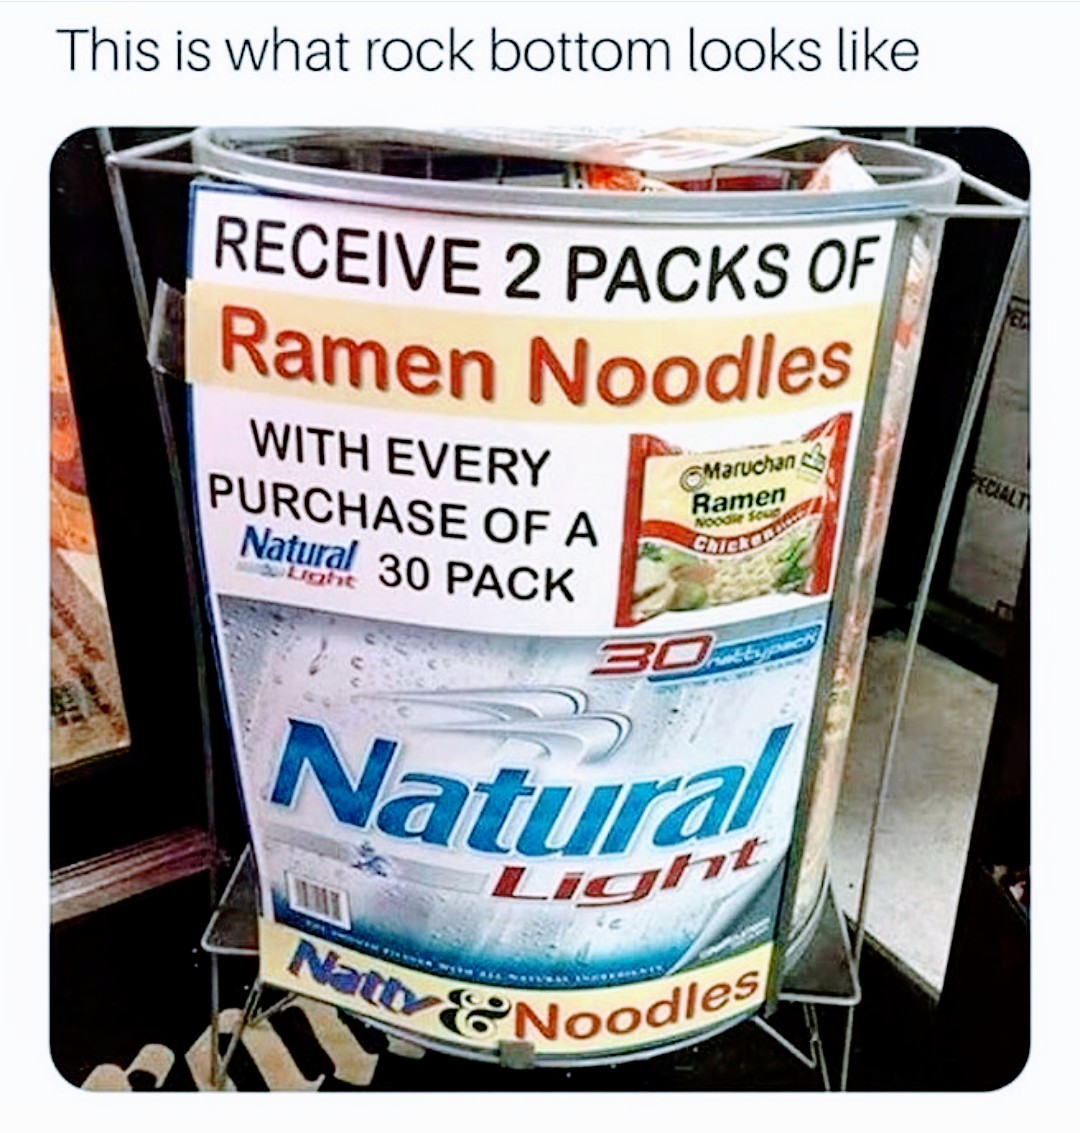 memes - rock bottom looks like - This is what rock bottom looks Receive 2 Packs Of Ramen Noodles With Every Purchase Of A Natural 30 Pack Maruchan 3 Ramen Nodo Encie Natural Natt En Noodles